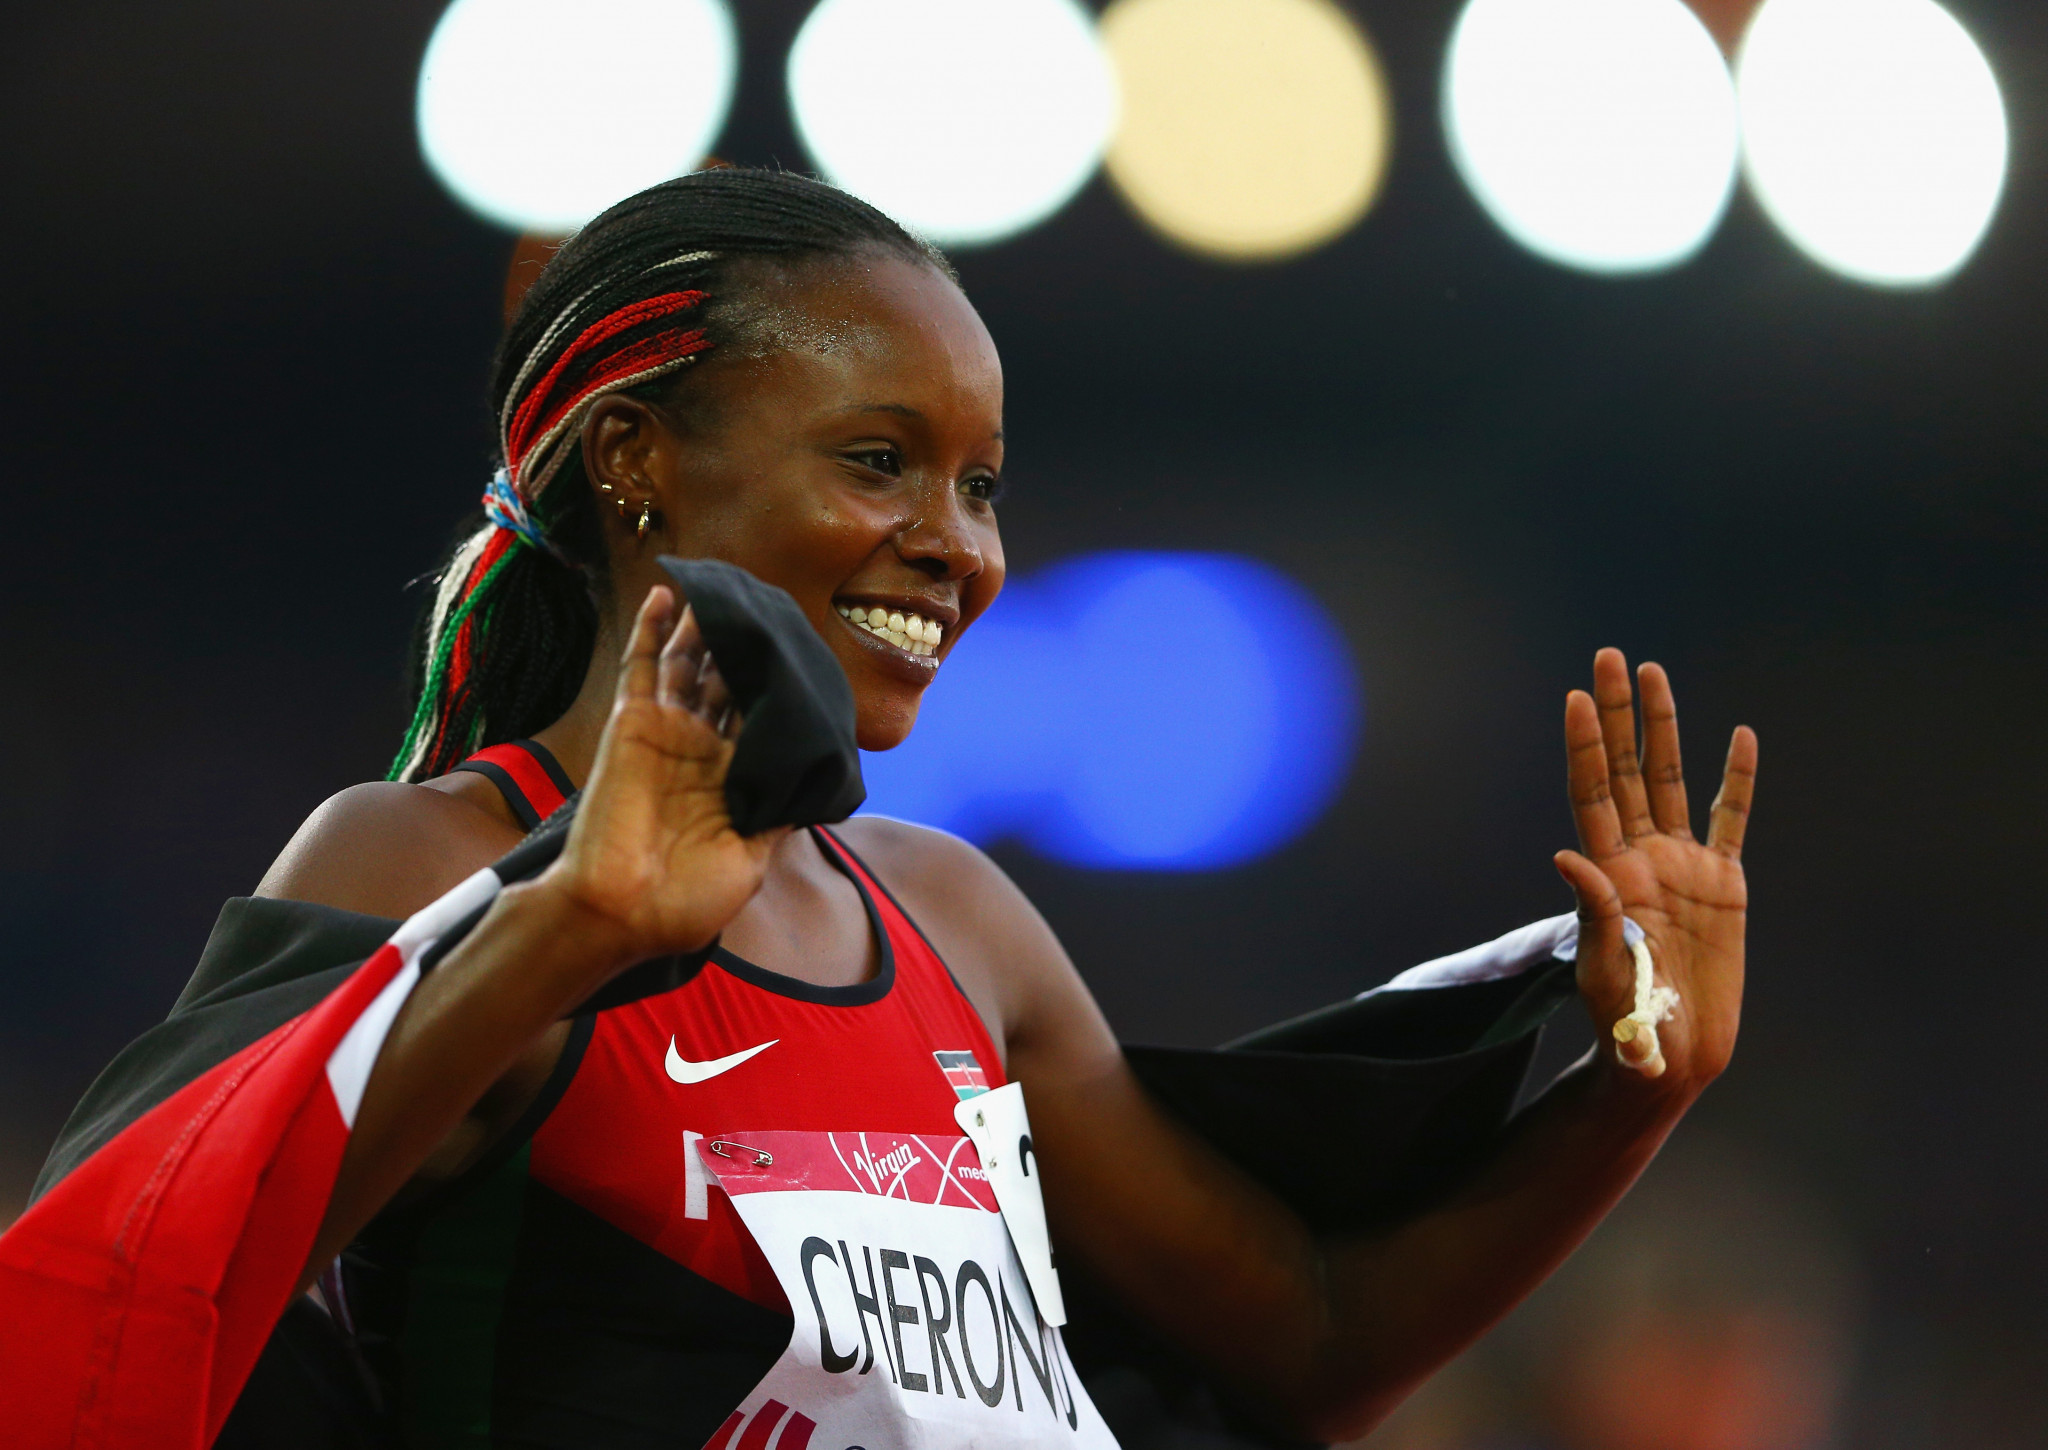 Kenya to be without at least six defending Commonwealth Games champions at Gold Coast 2018